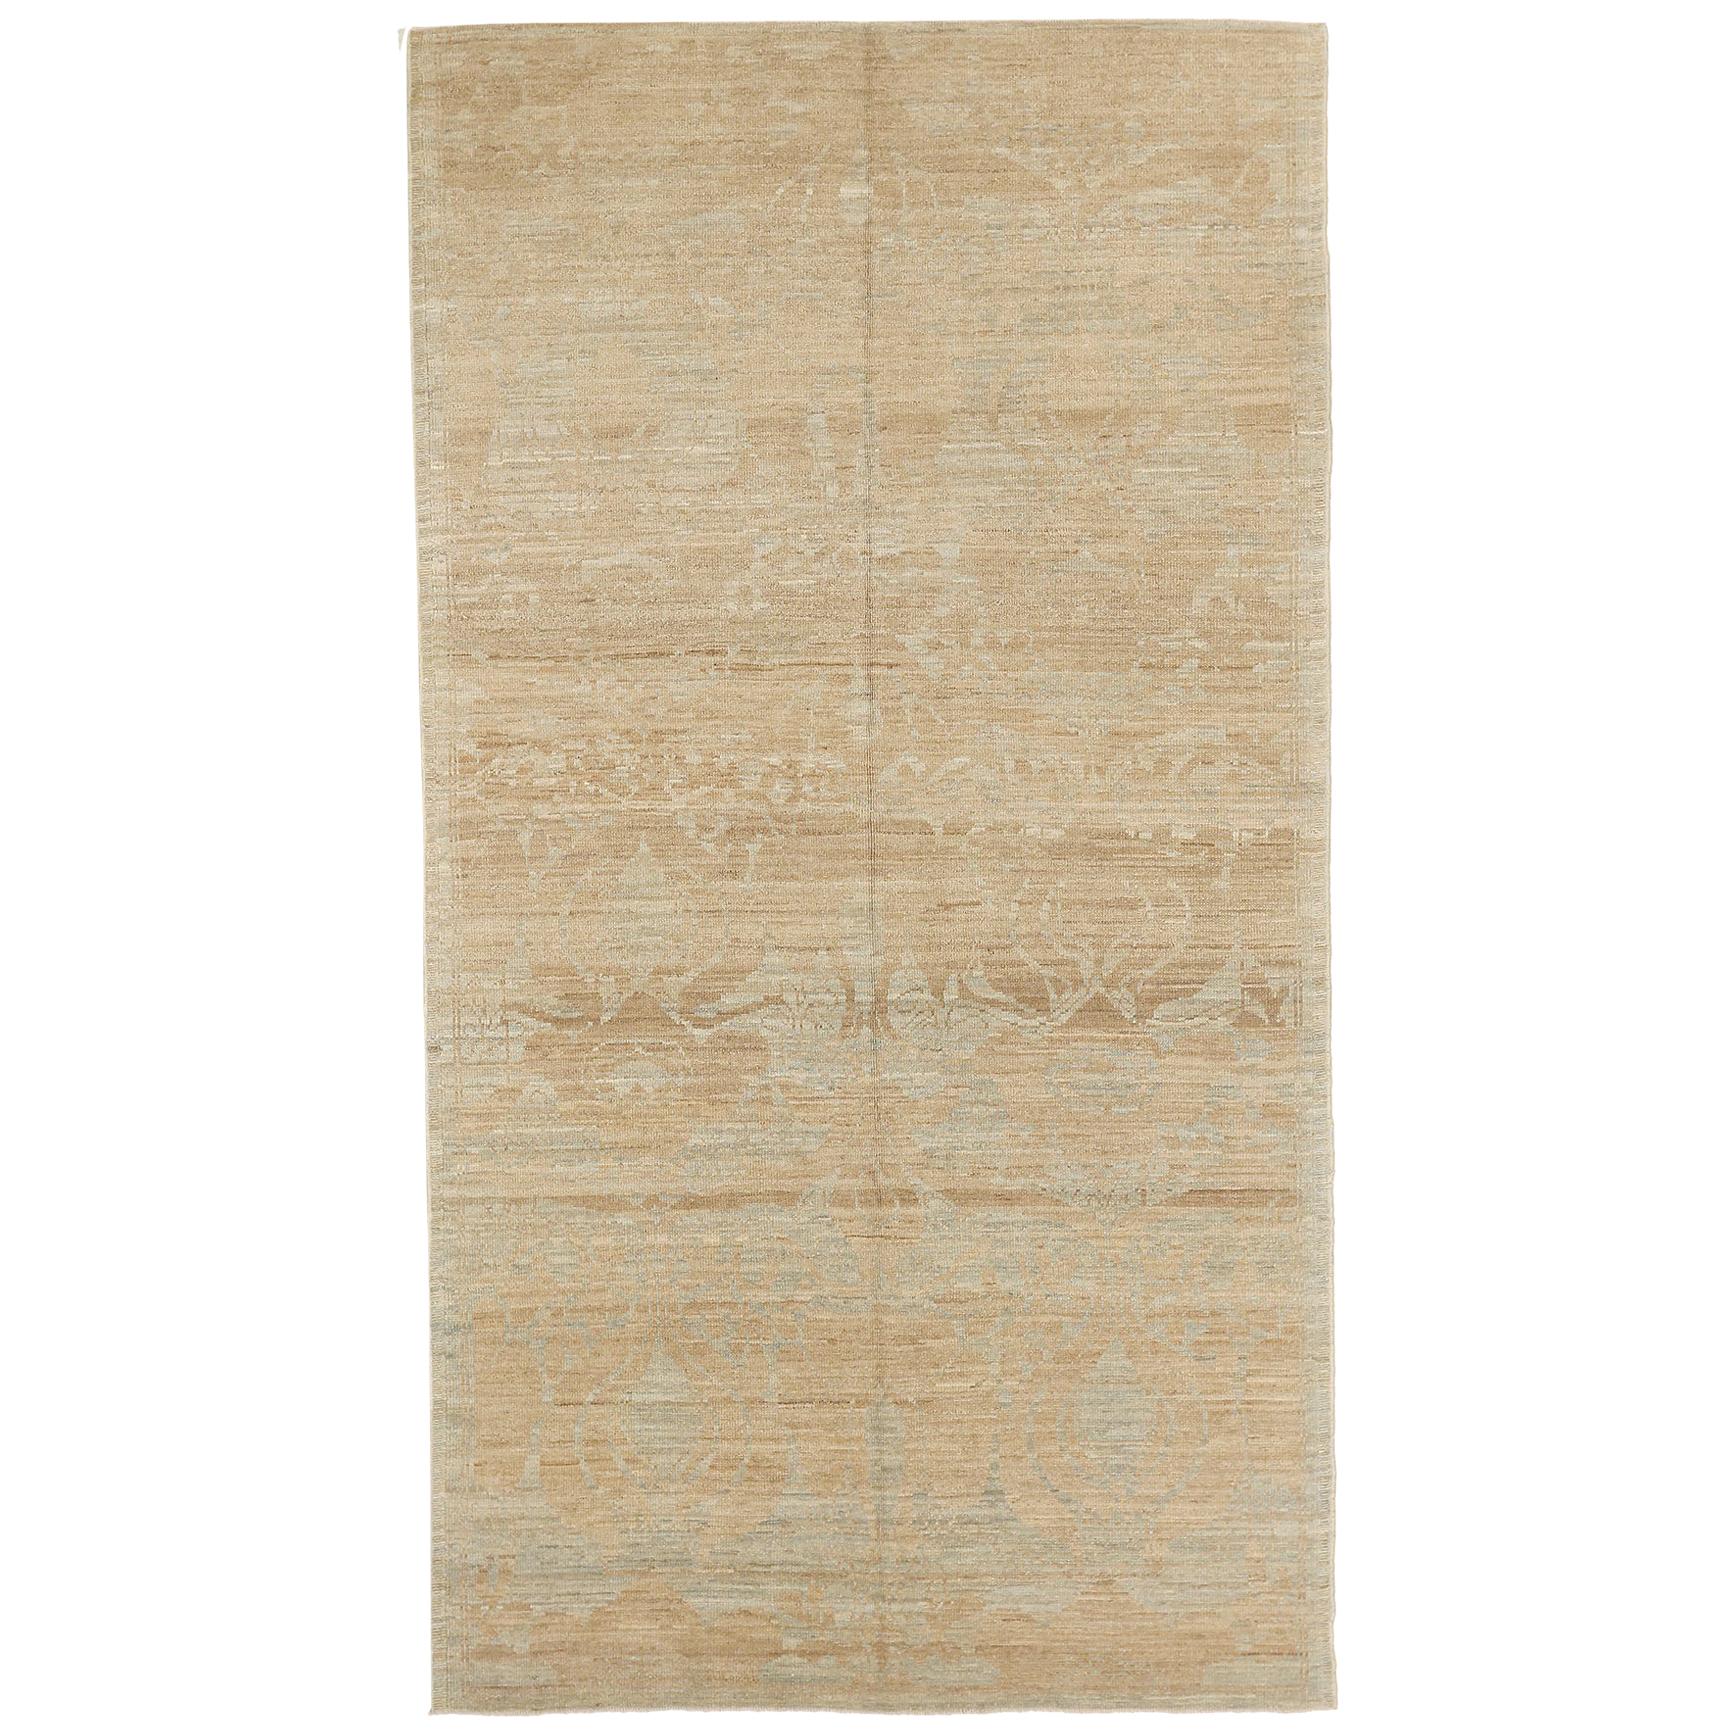 New Turkish Oushak Rug with Brown & Gray Floral Field